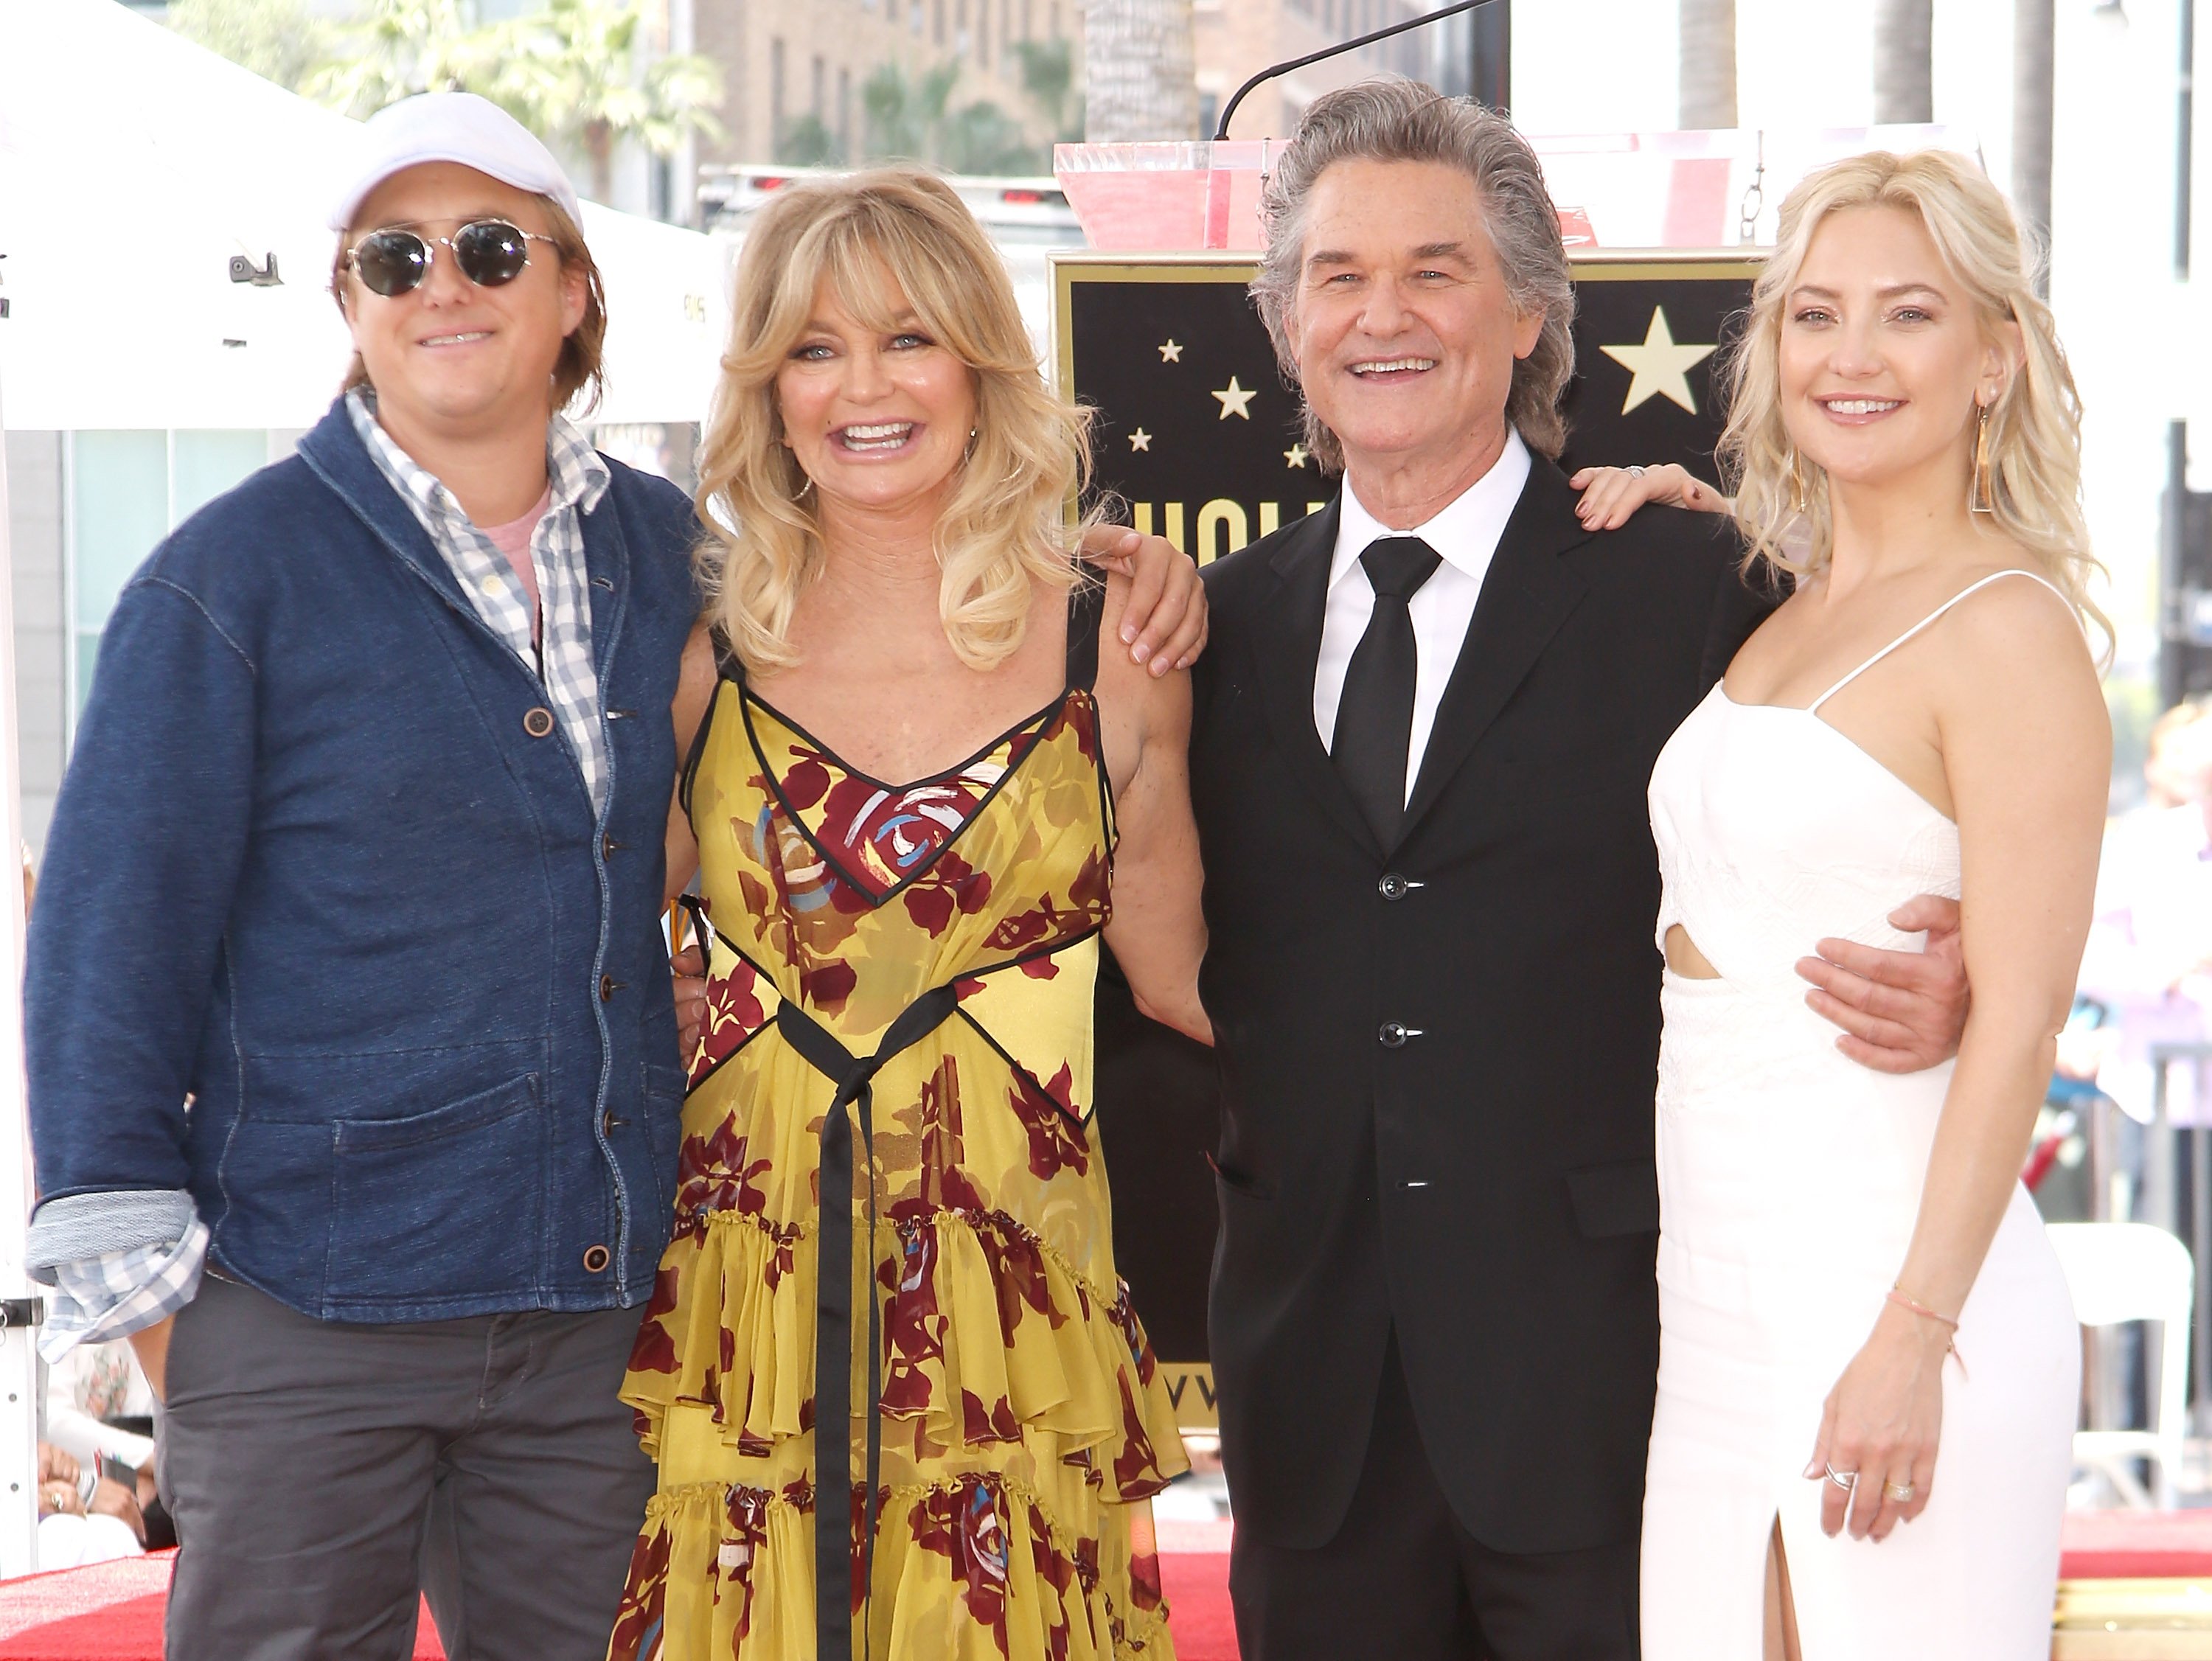 Goldie Hawn, Kurt Russell and their family attend the ceremony honoring Goldie Hawn and Kurt Russell on May 4, 2017 in Hollywood, California | Photo: Getty Images